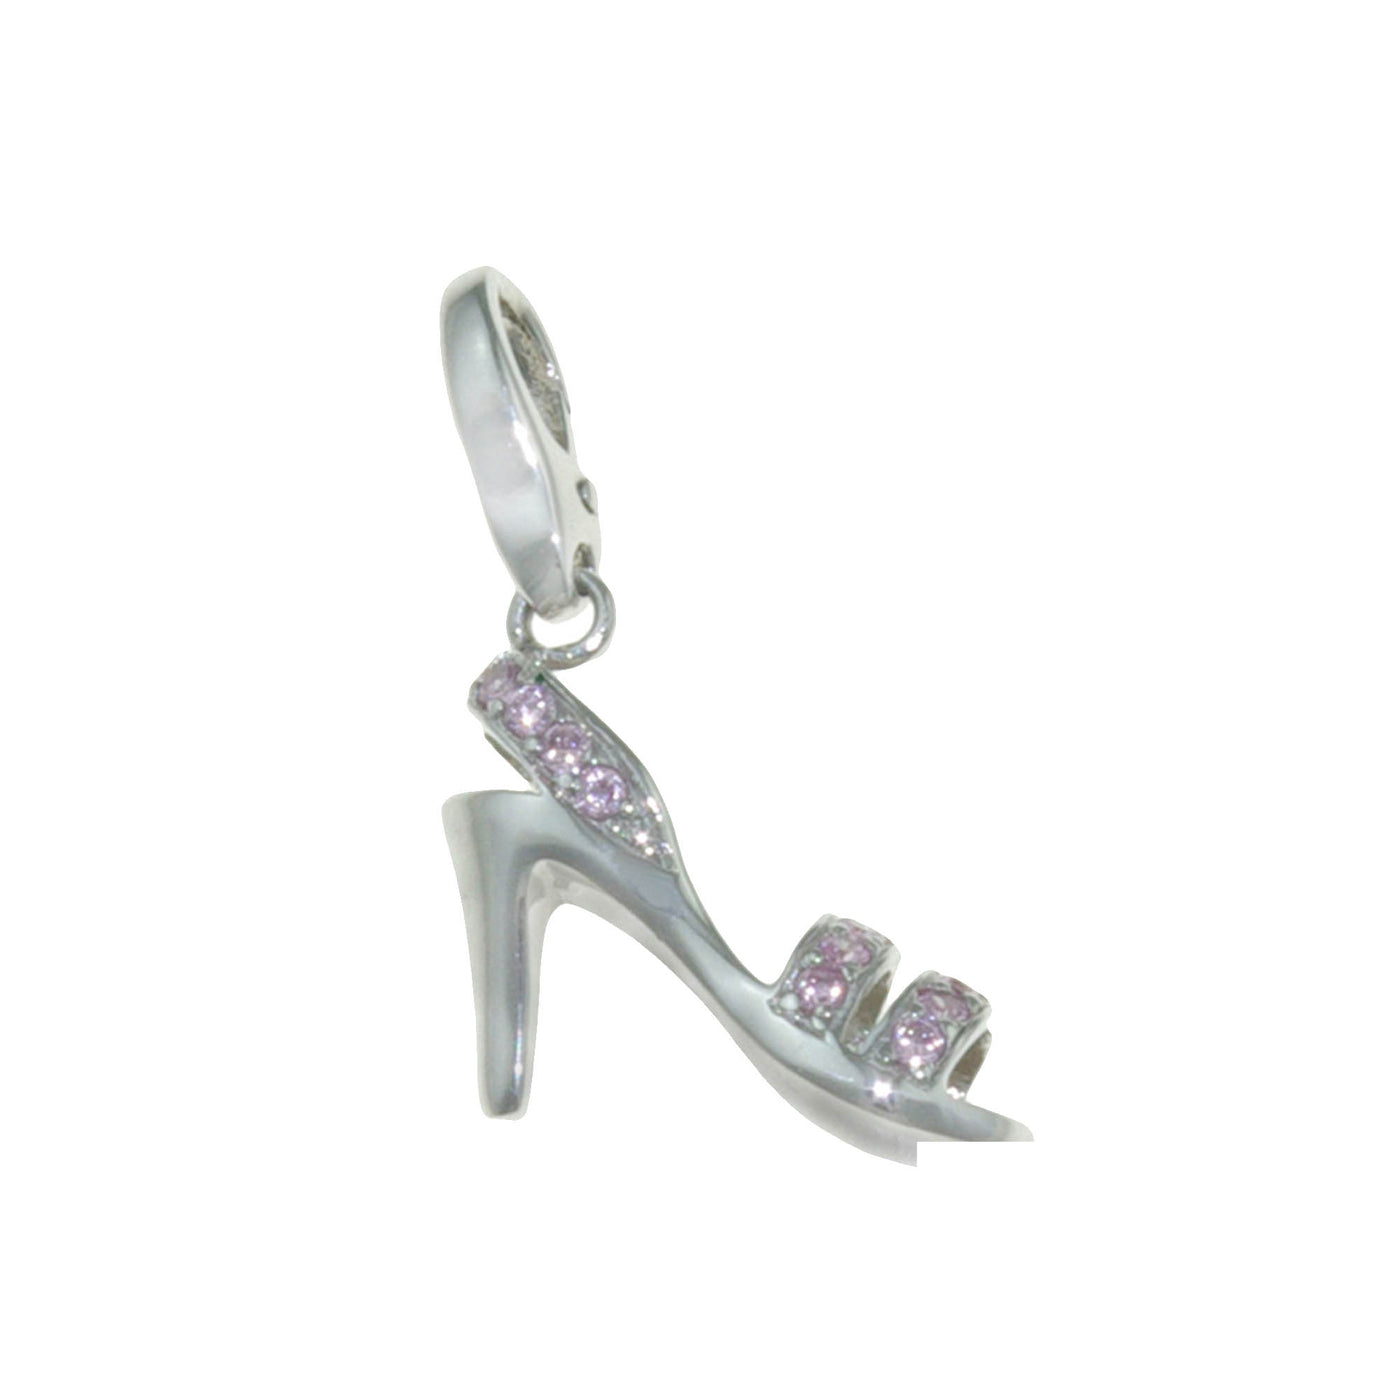 Rebecca Sloane Sterling Silver Shoe With Pink Cz Charm